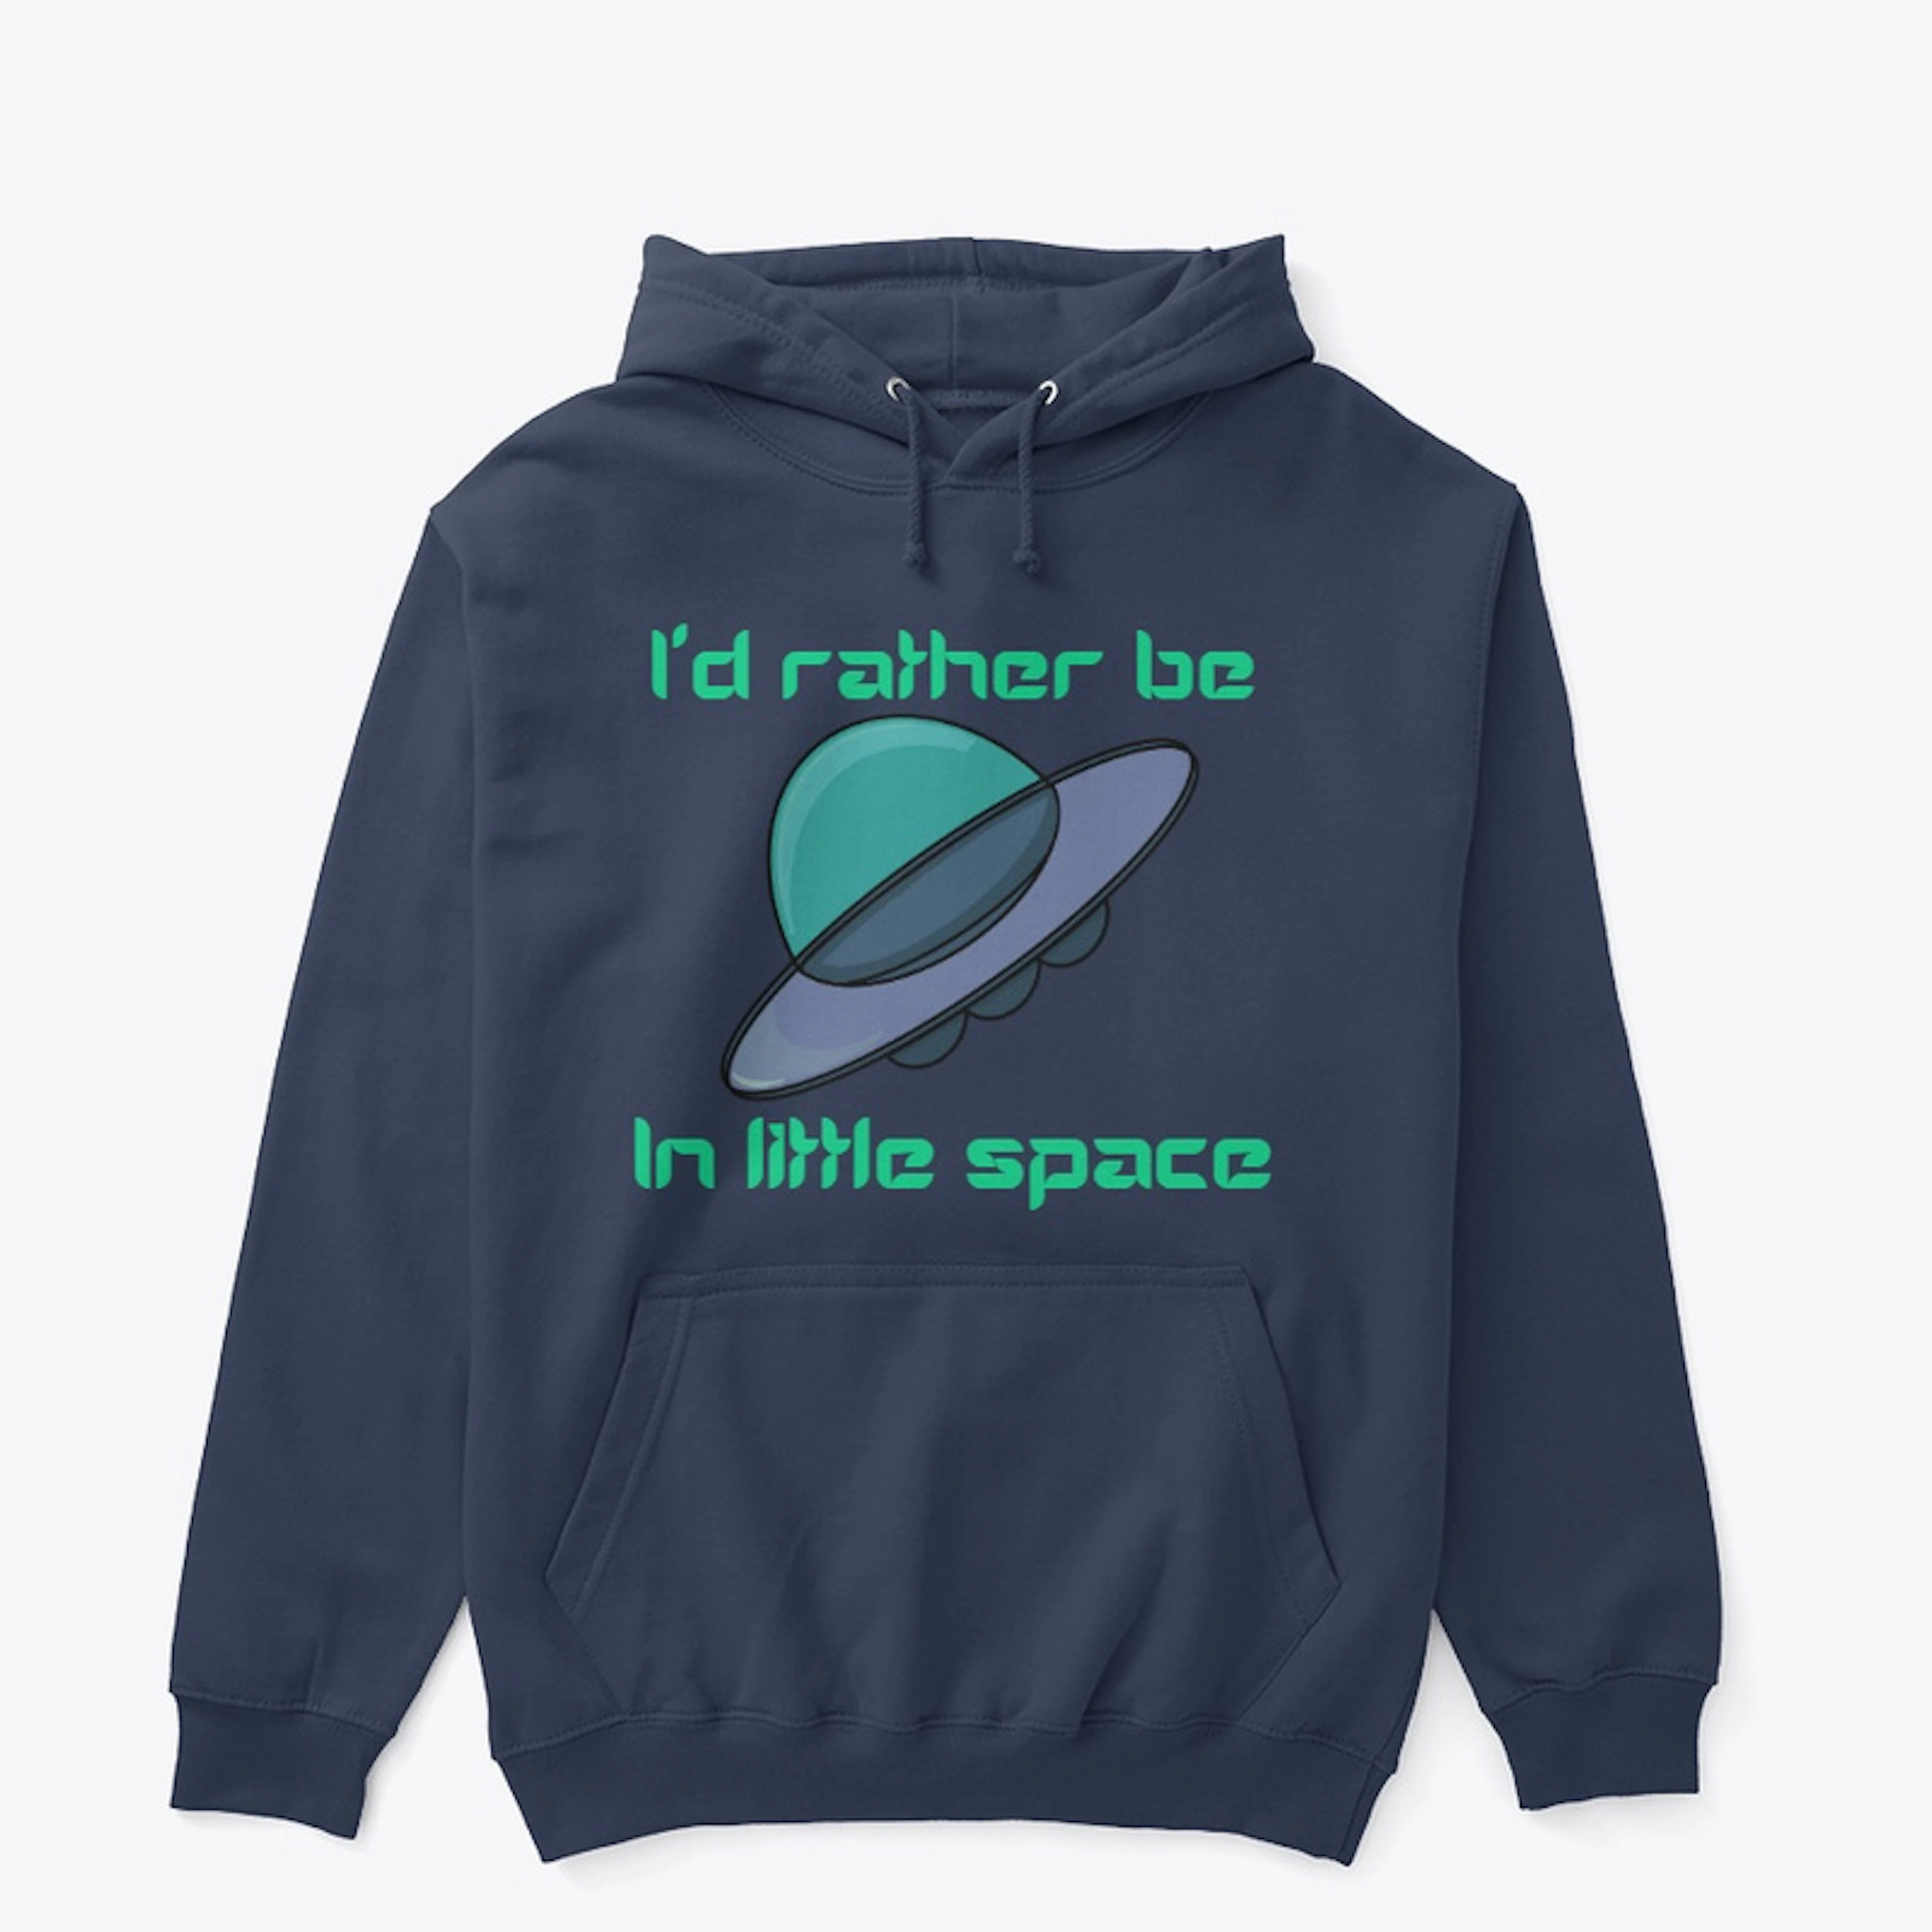 I'd rather be in little space